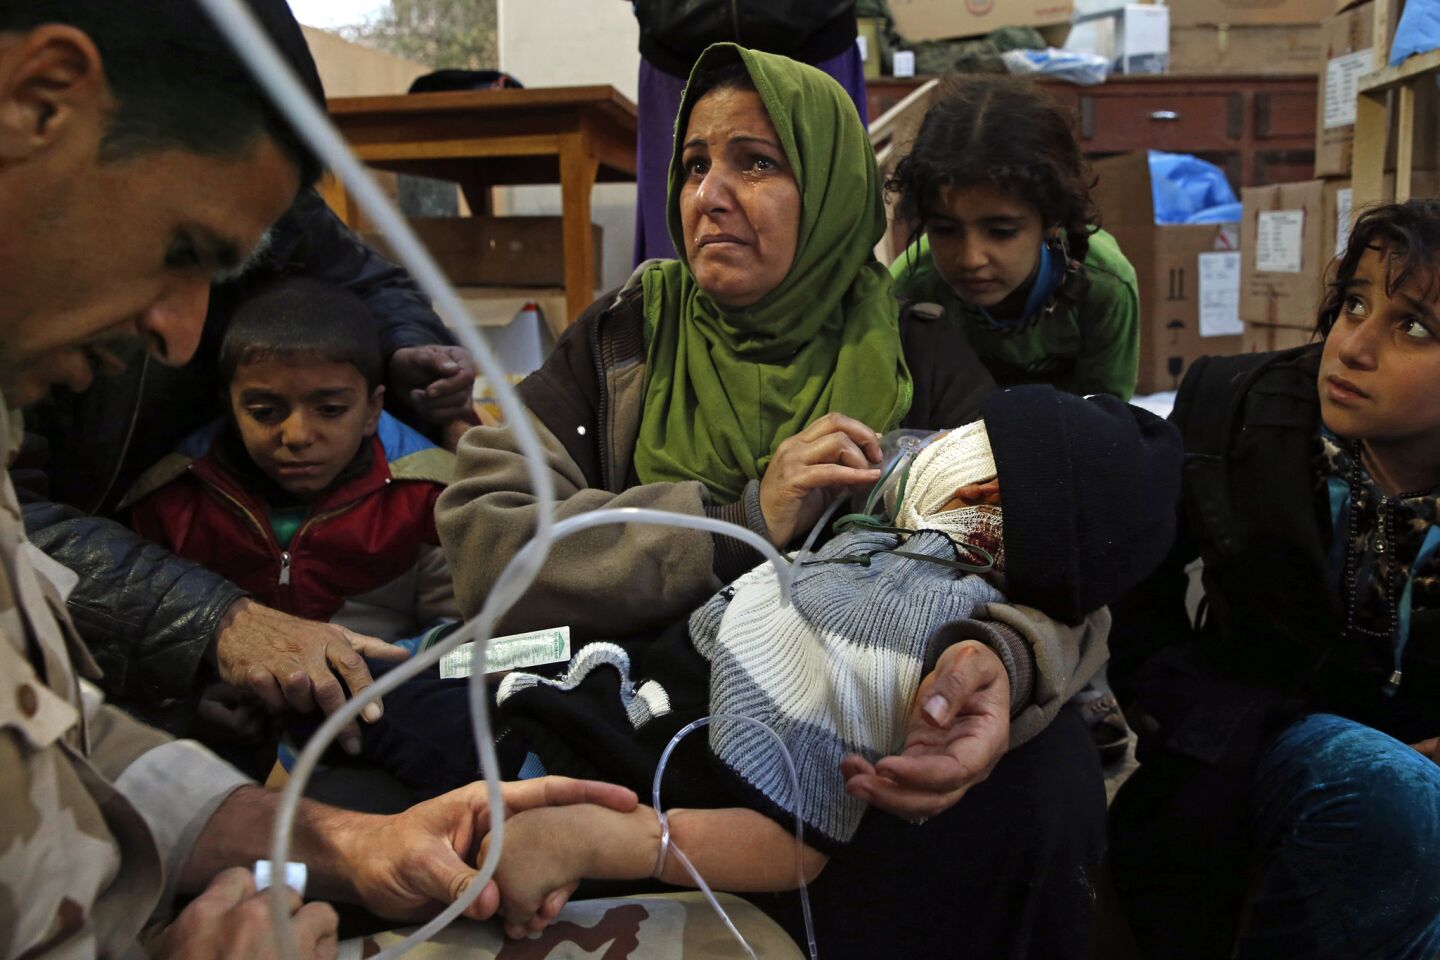 Wafa Abdel Raza, 39, holds her son Mahmoud Setar, 4, as the doctors give him oxygen and and fluids. The boy's head was badly injured when a truck bomb exploded near their home. "We were sleeping in the house," said Raza. "The army was close to us and we made food for them. They were waiting behind the house and a suicide car came." Her son recovered as the night progressed.